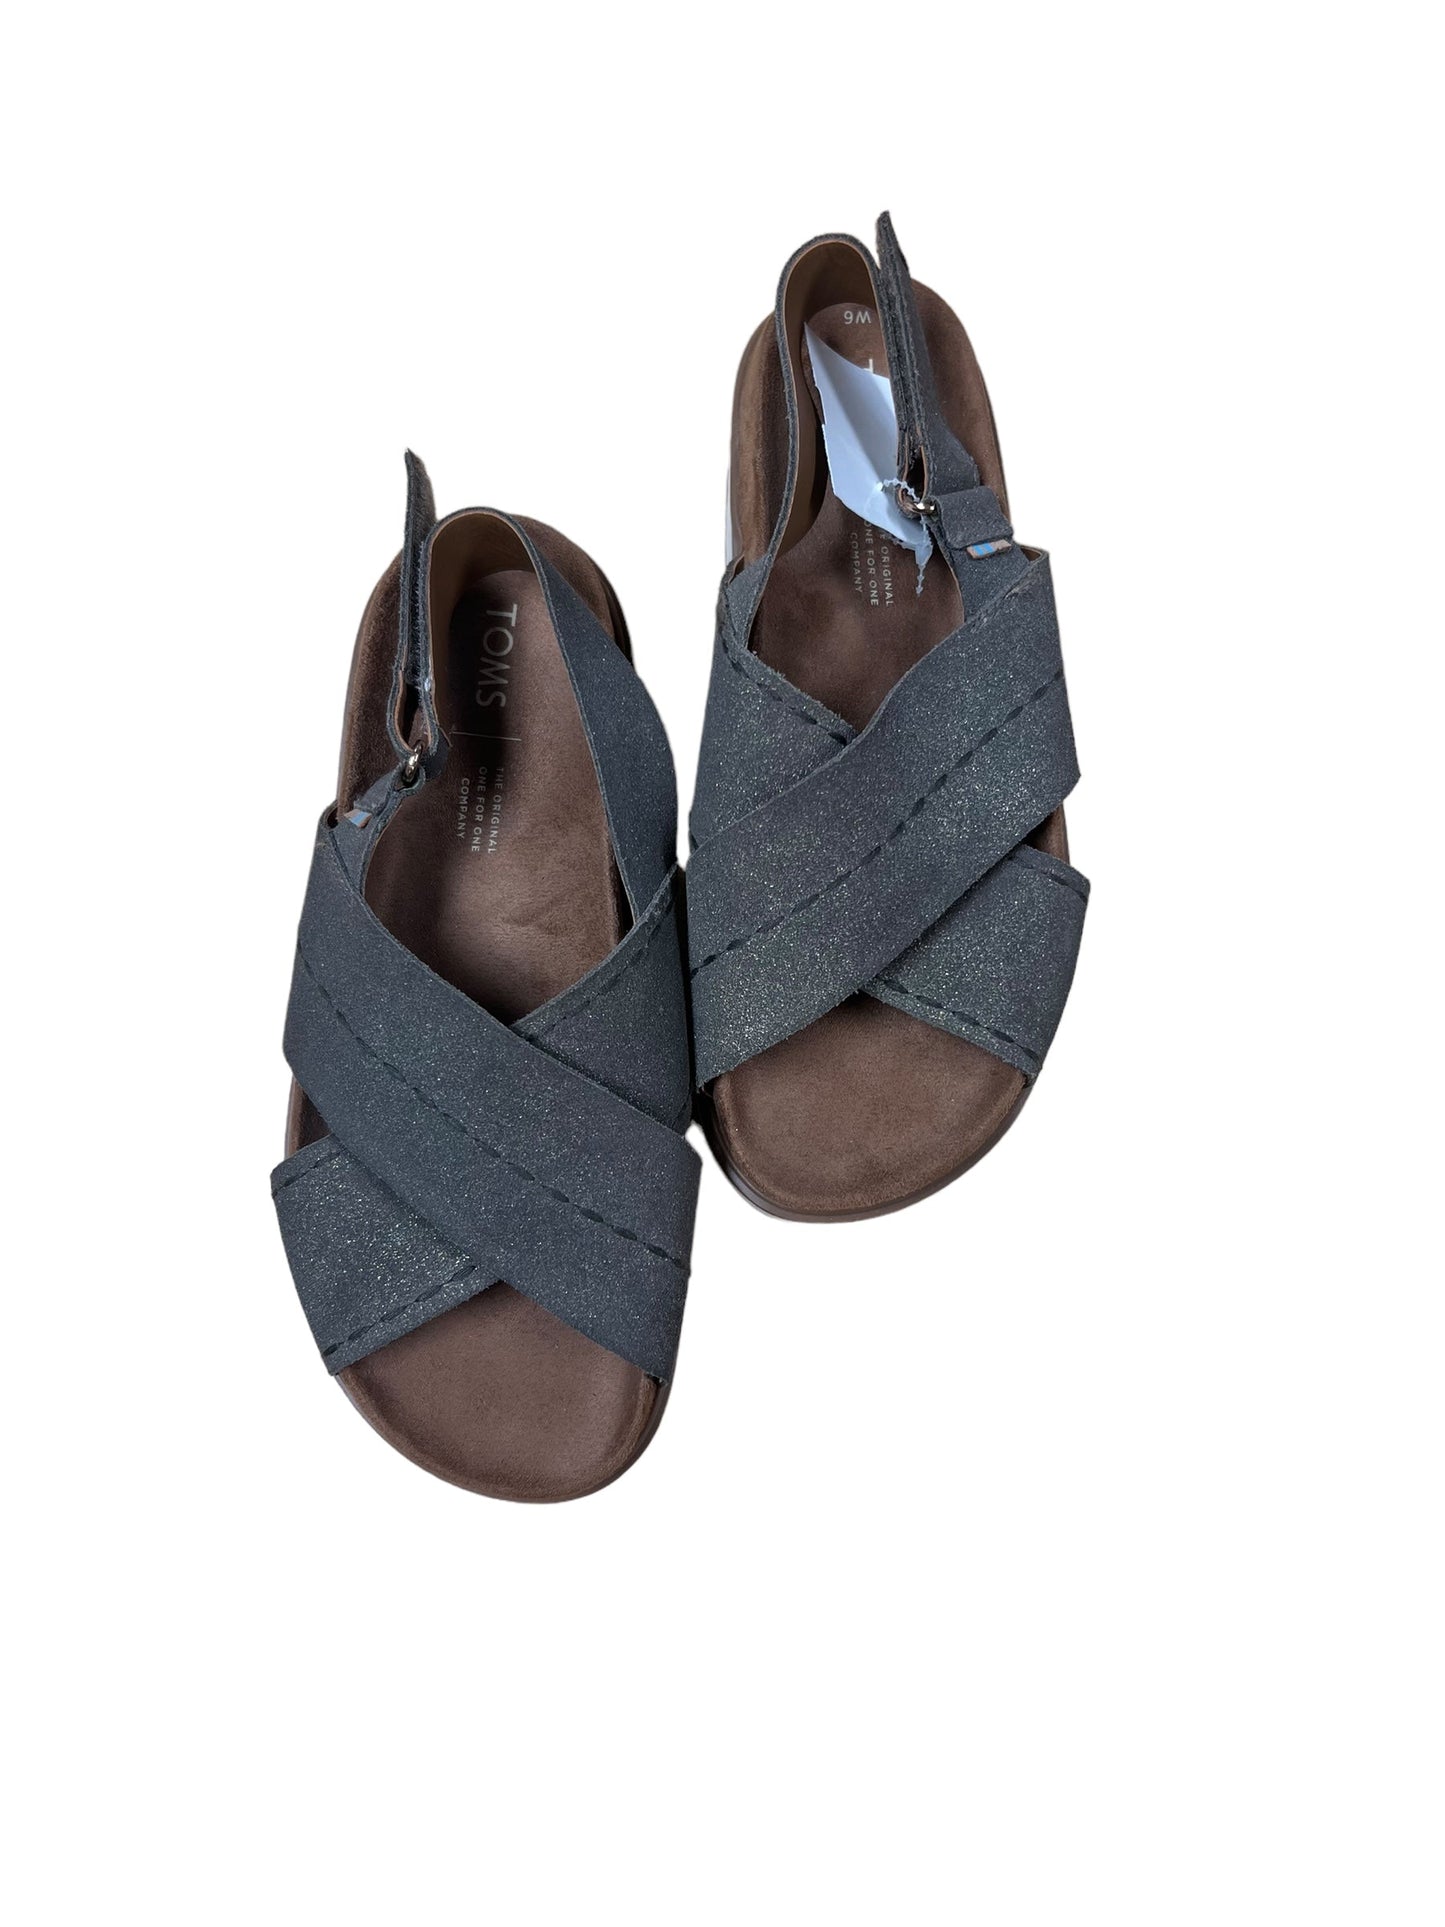 Sandals Flats By Toms  Size: 6